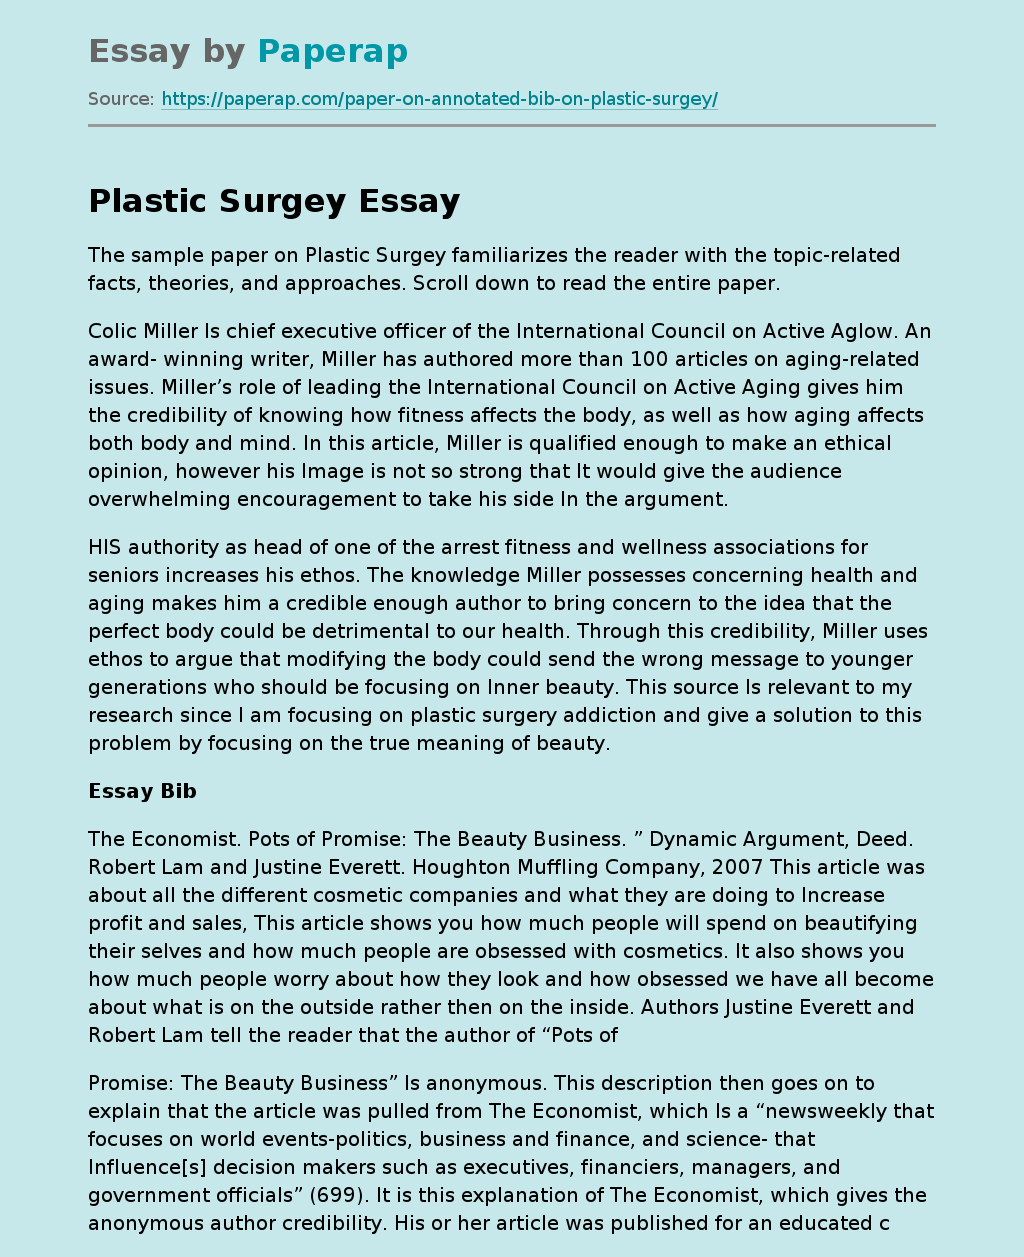 Plastic Surgery Overview